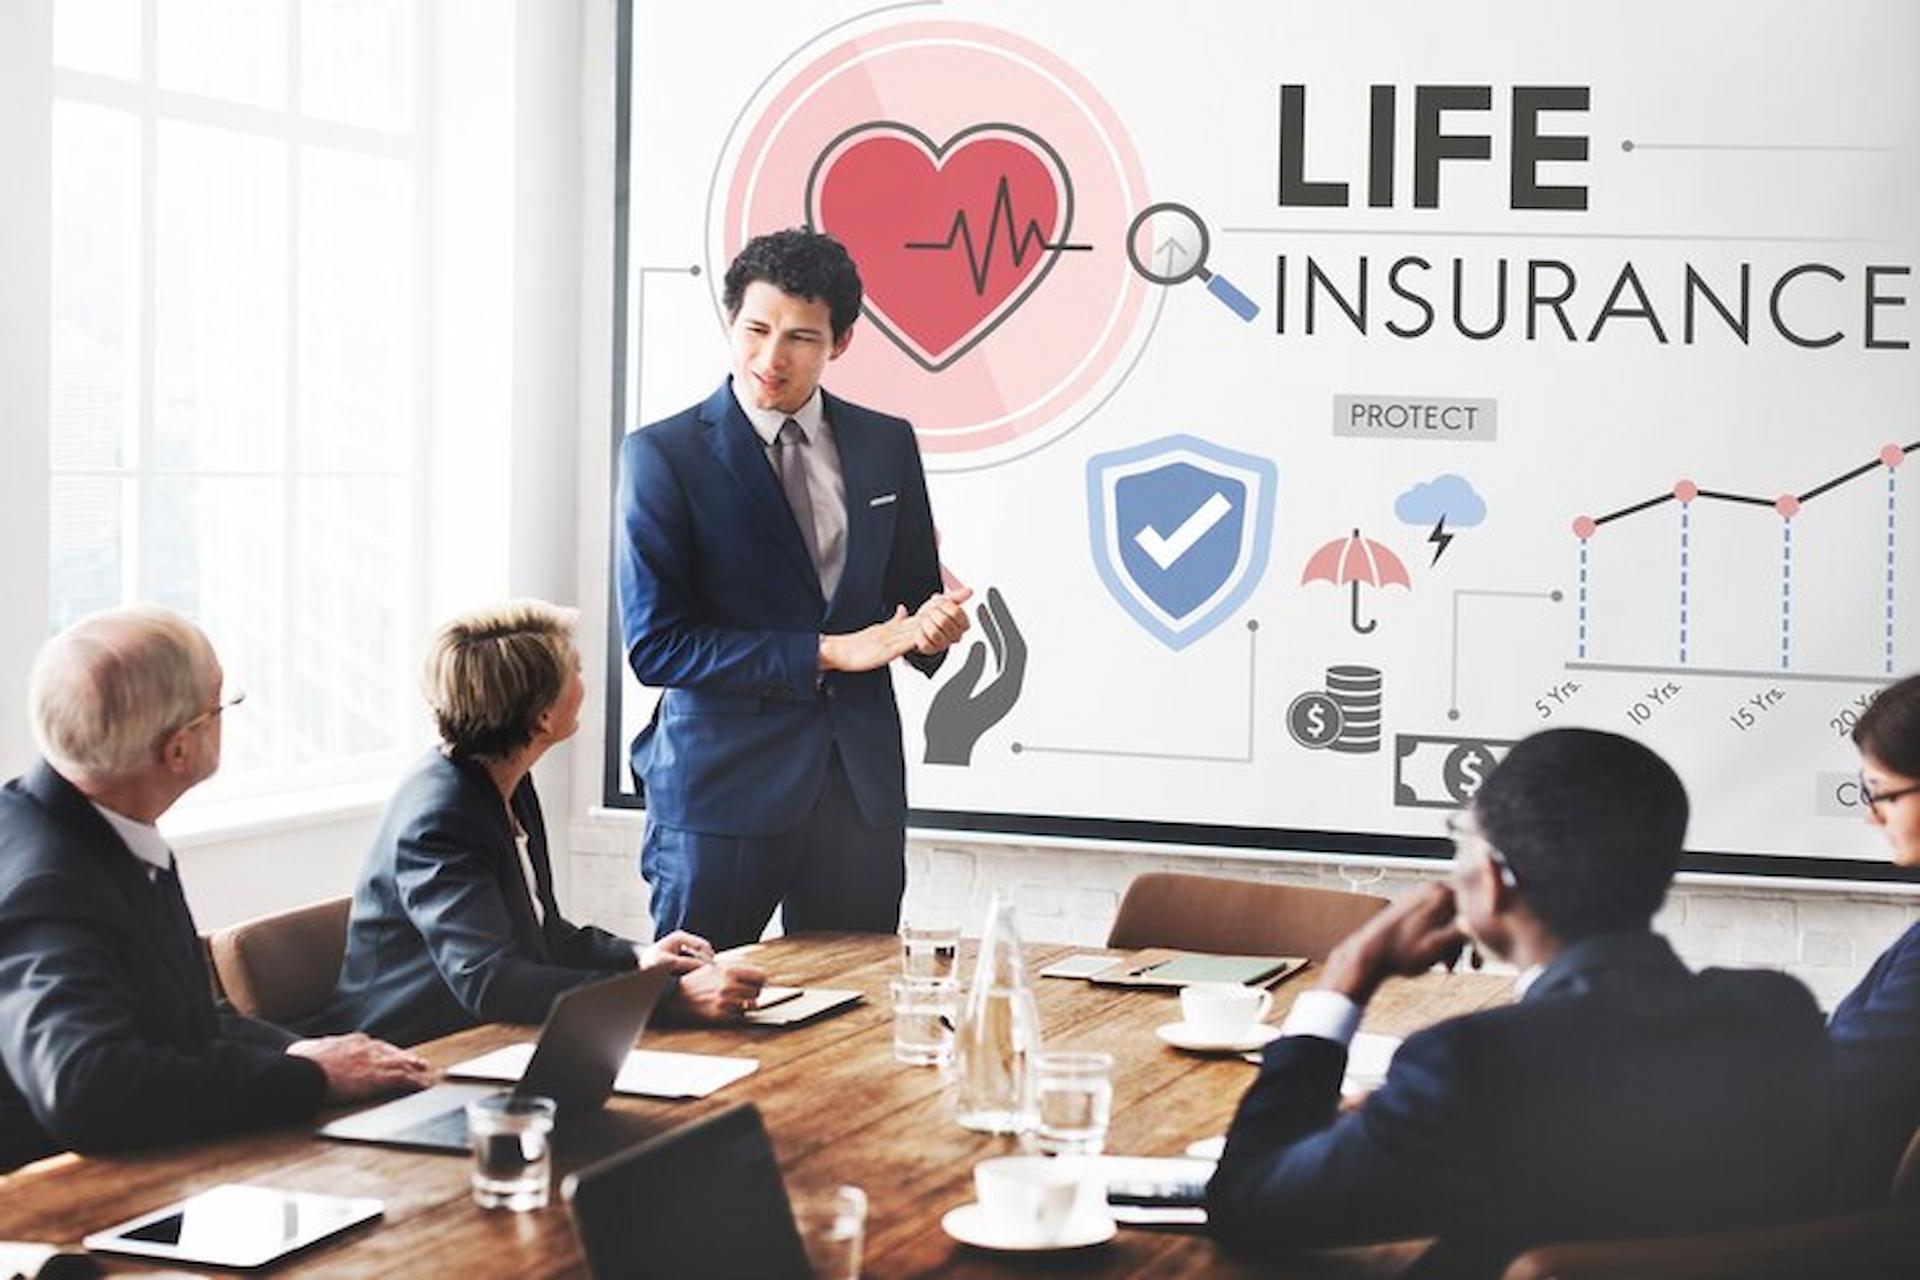 How General Life Insurance Safeguards Your Financial Future